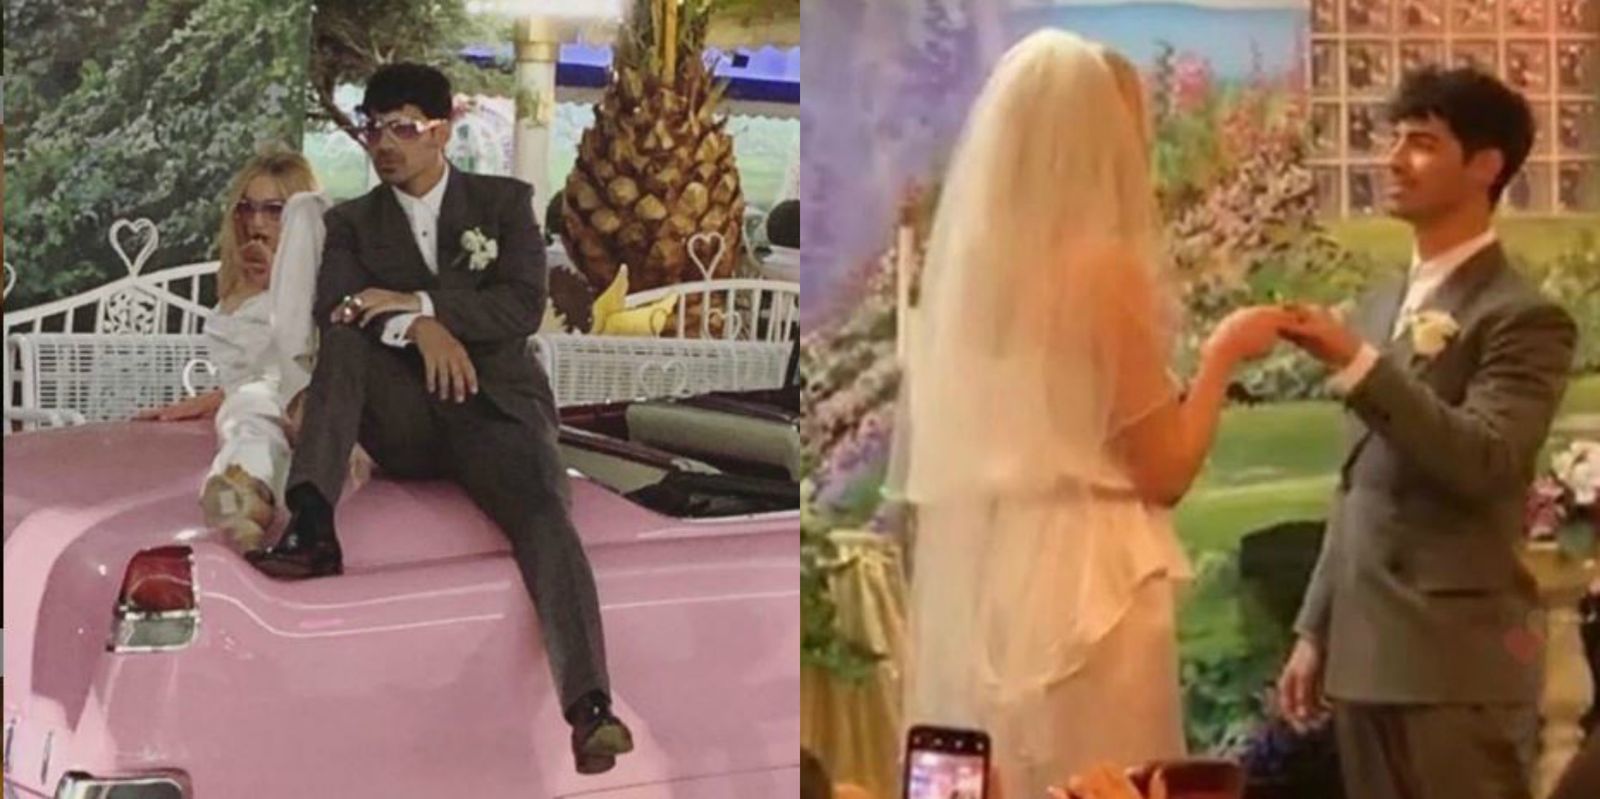 Joe Jonas And Sophie Turner Wedding: All The Inside Pictures And Videos From The Impromptu Ceremony 